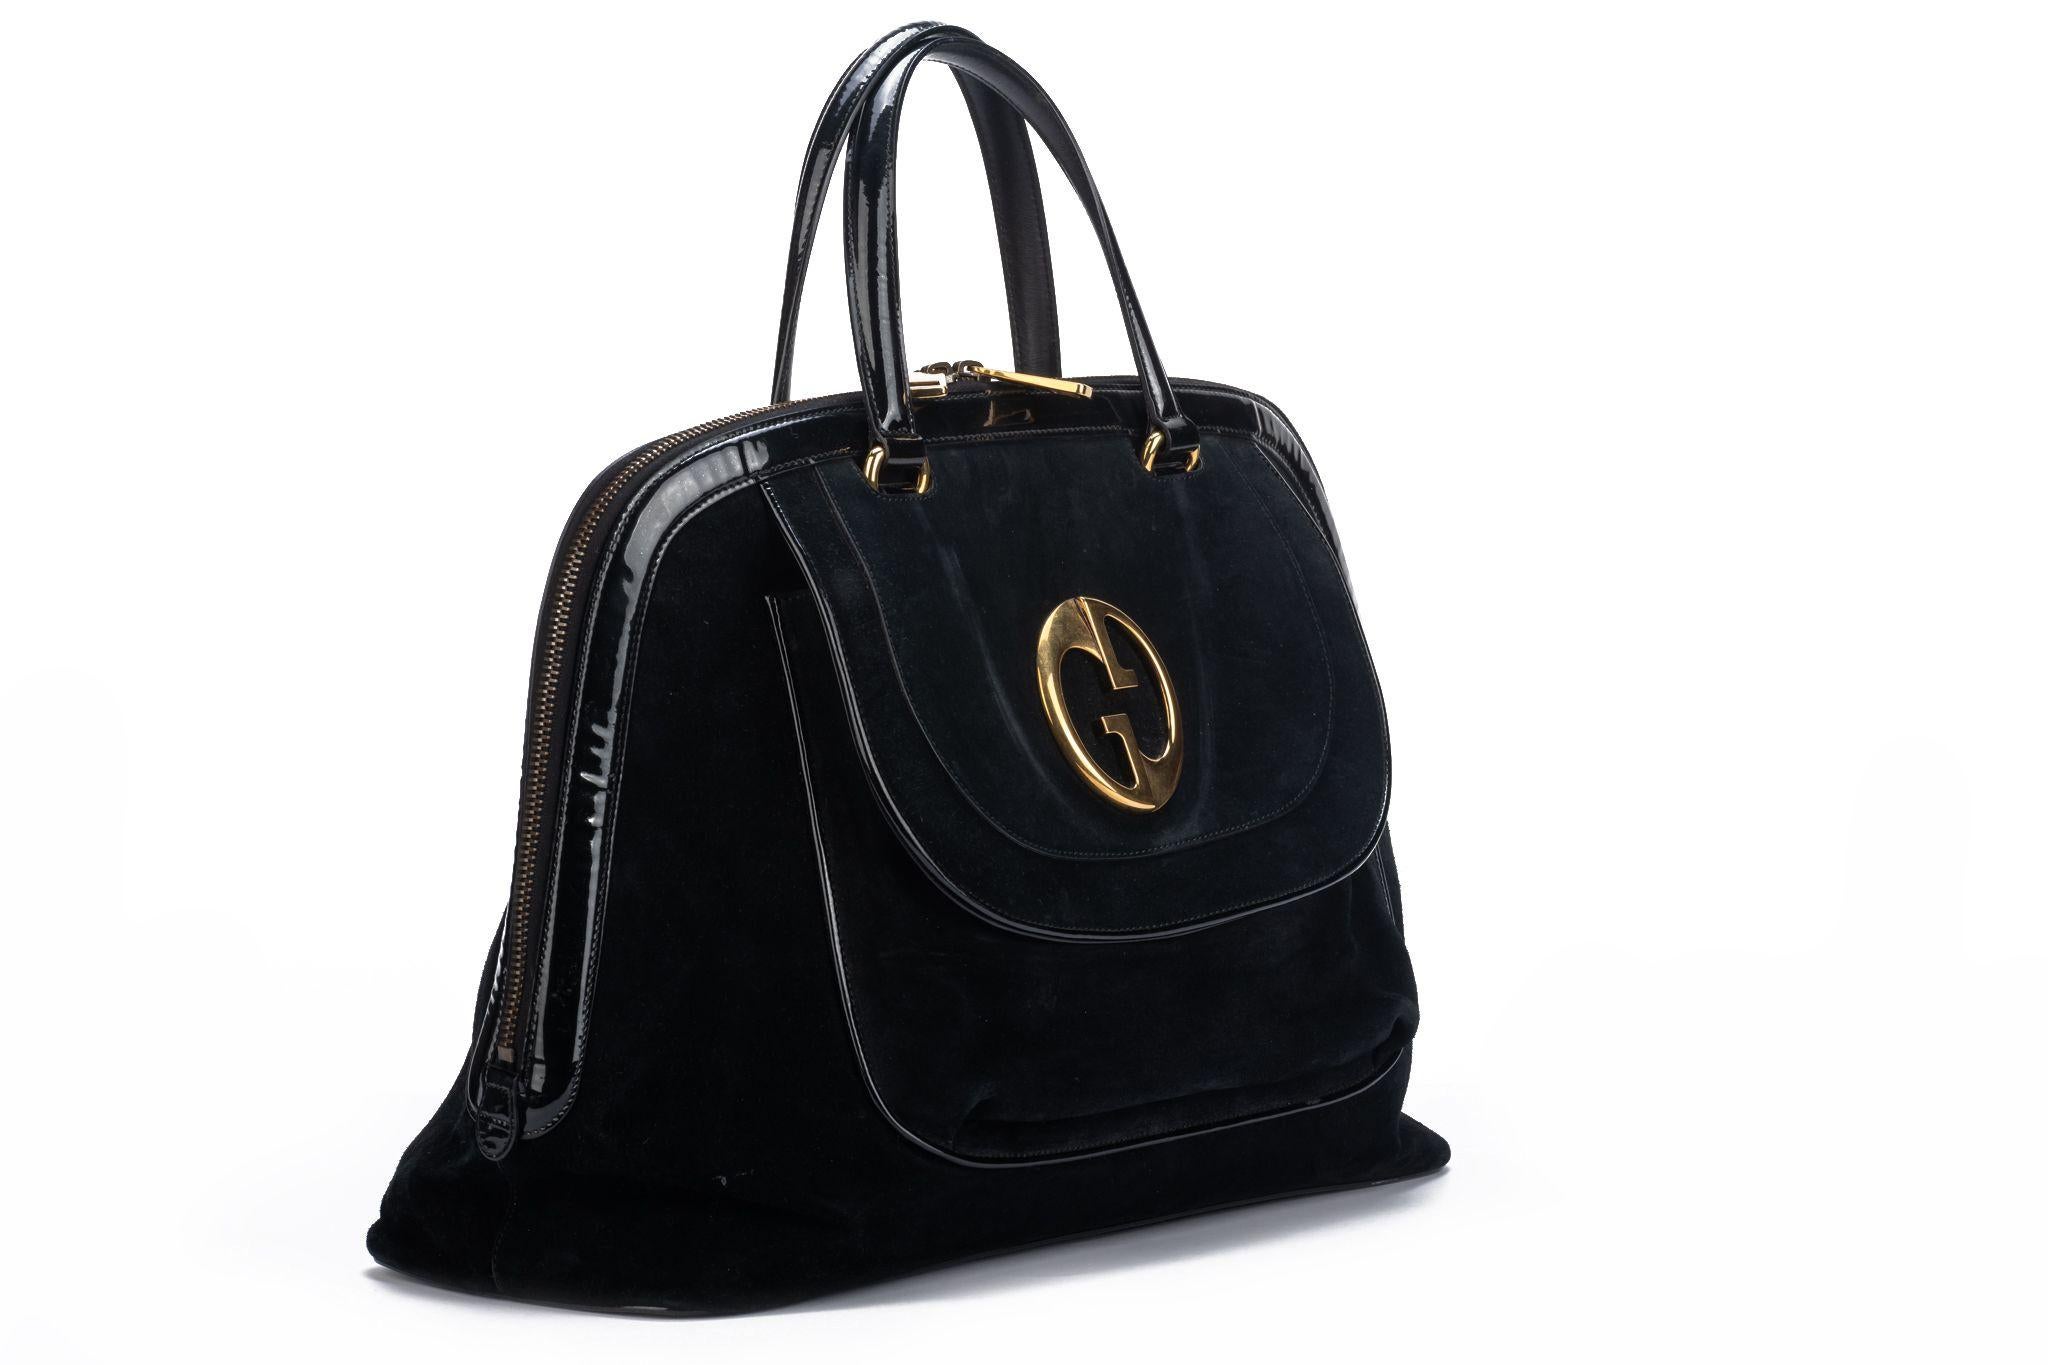 Gucci vintage oversize black suede travel bag with patent leather trim and large logo in gold hardware. Generic dust cover.